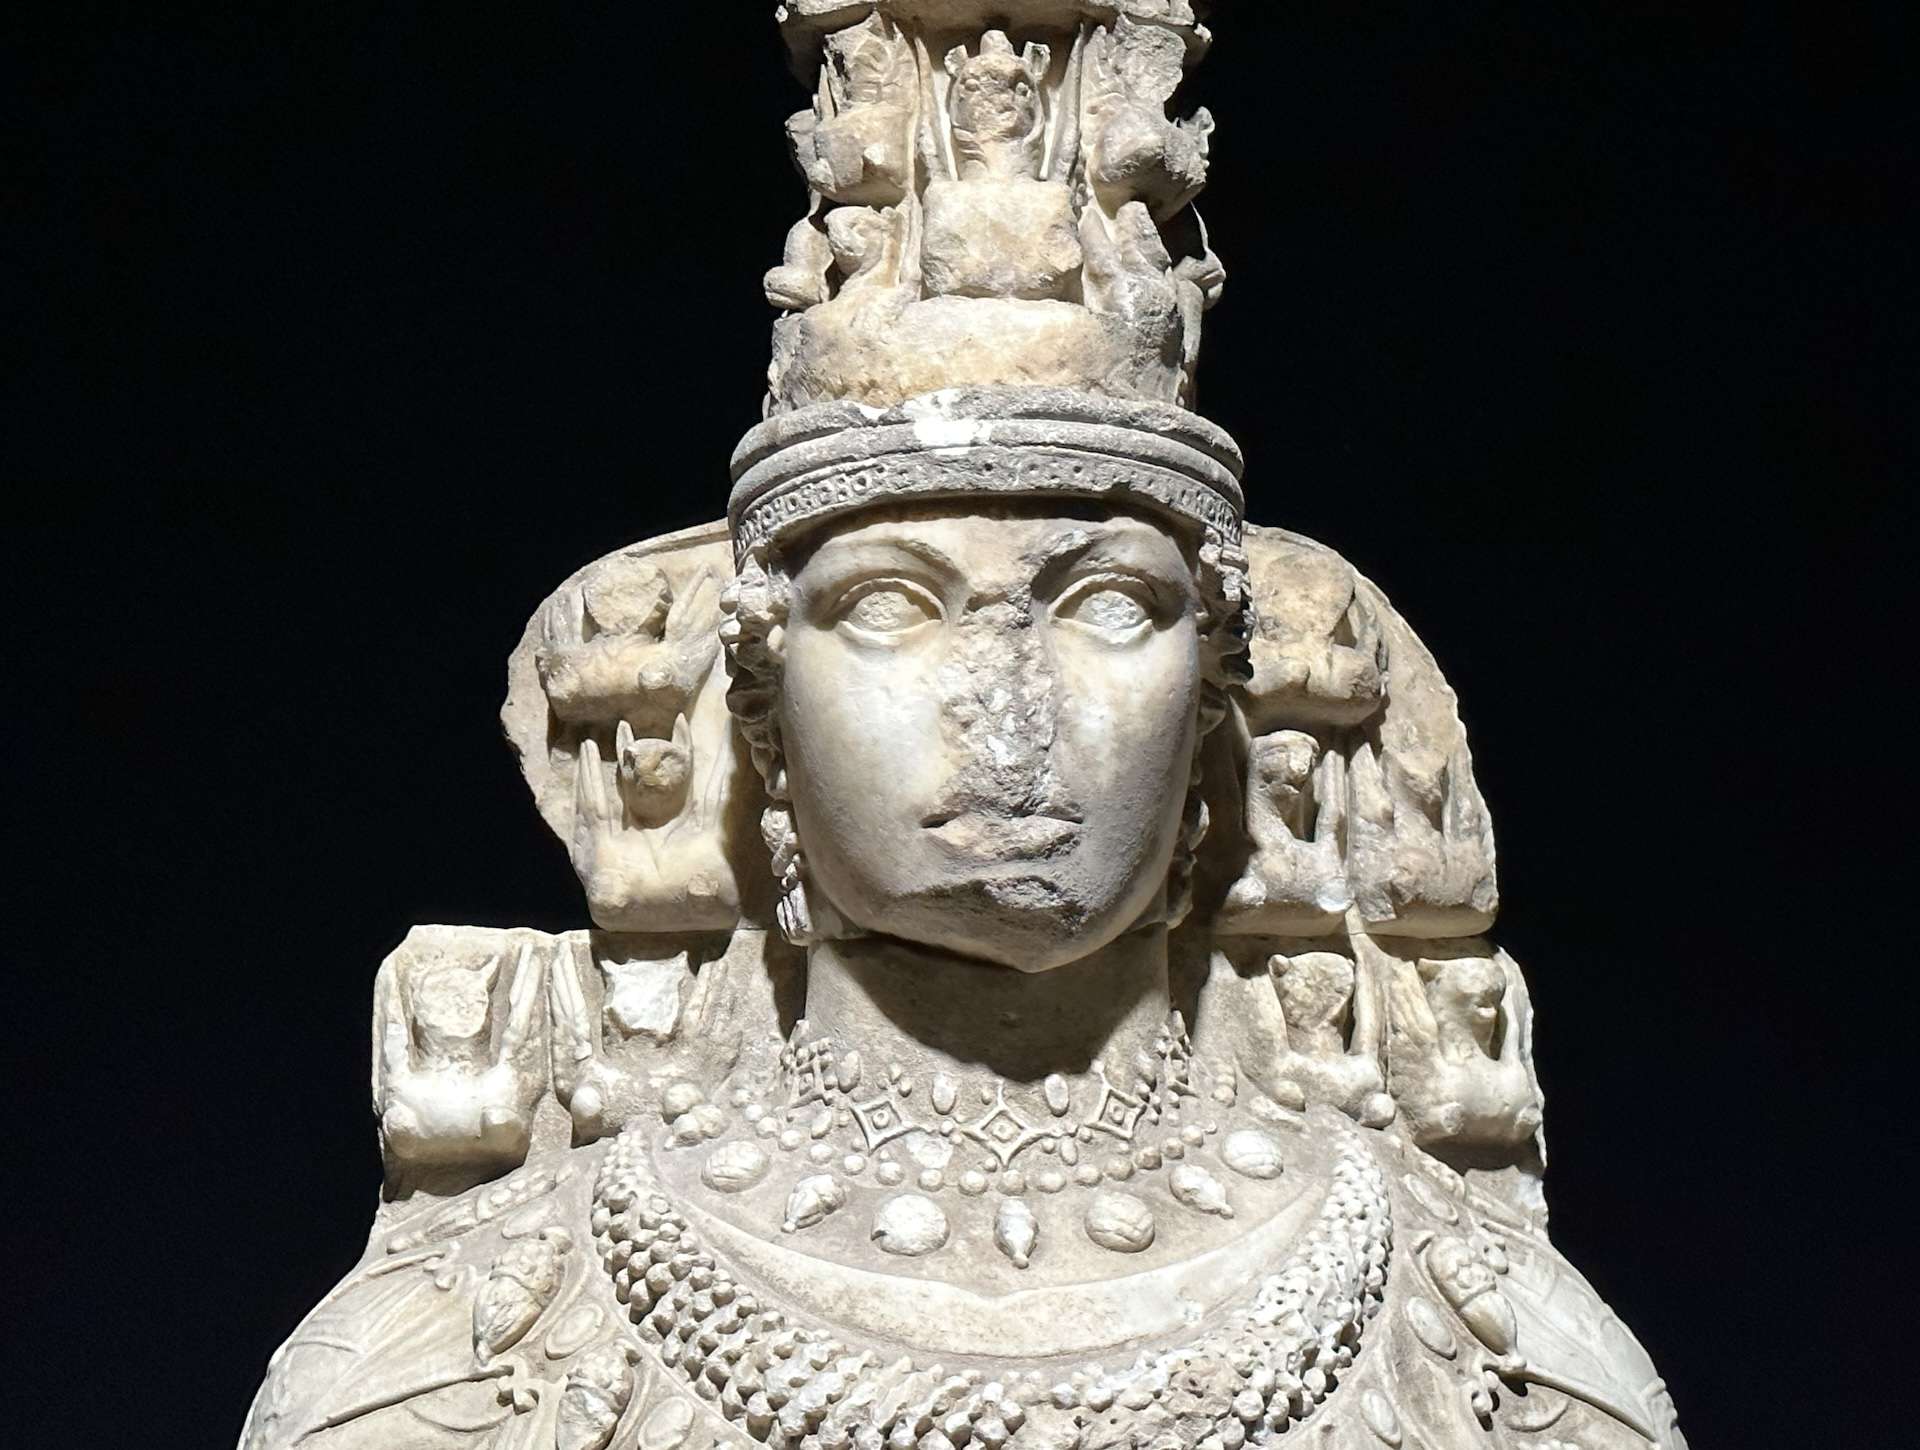 Face of the Great Artemis Statue at the Ephesus Museum in Selçuk, Turkey